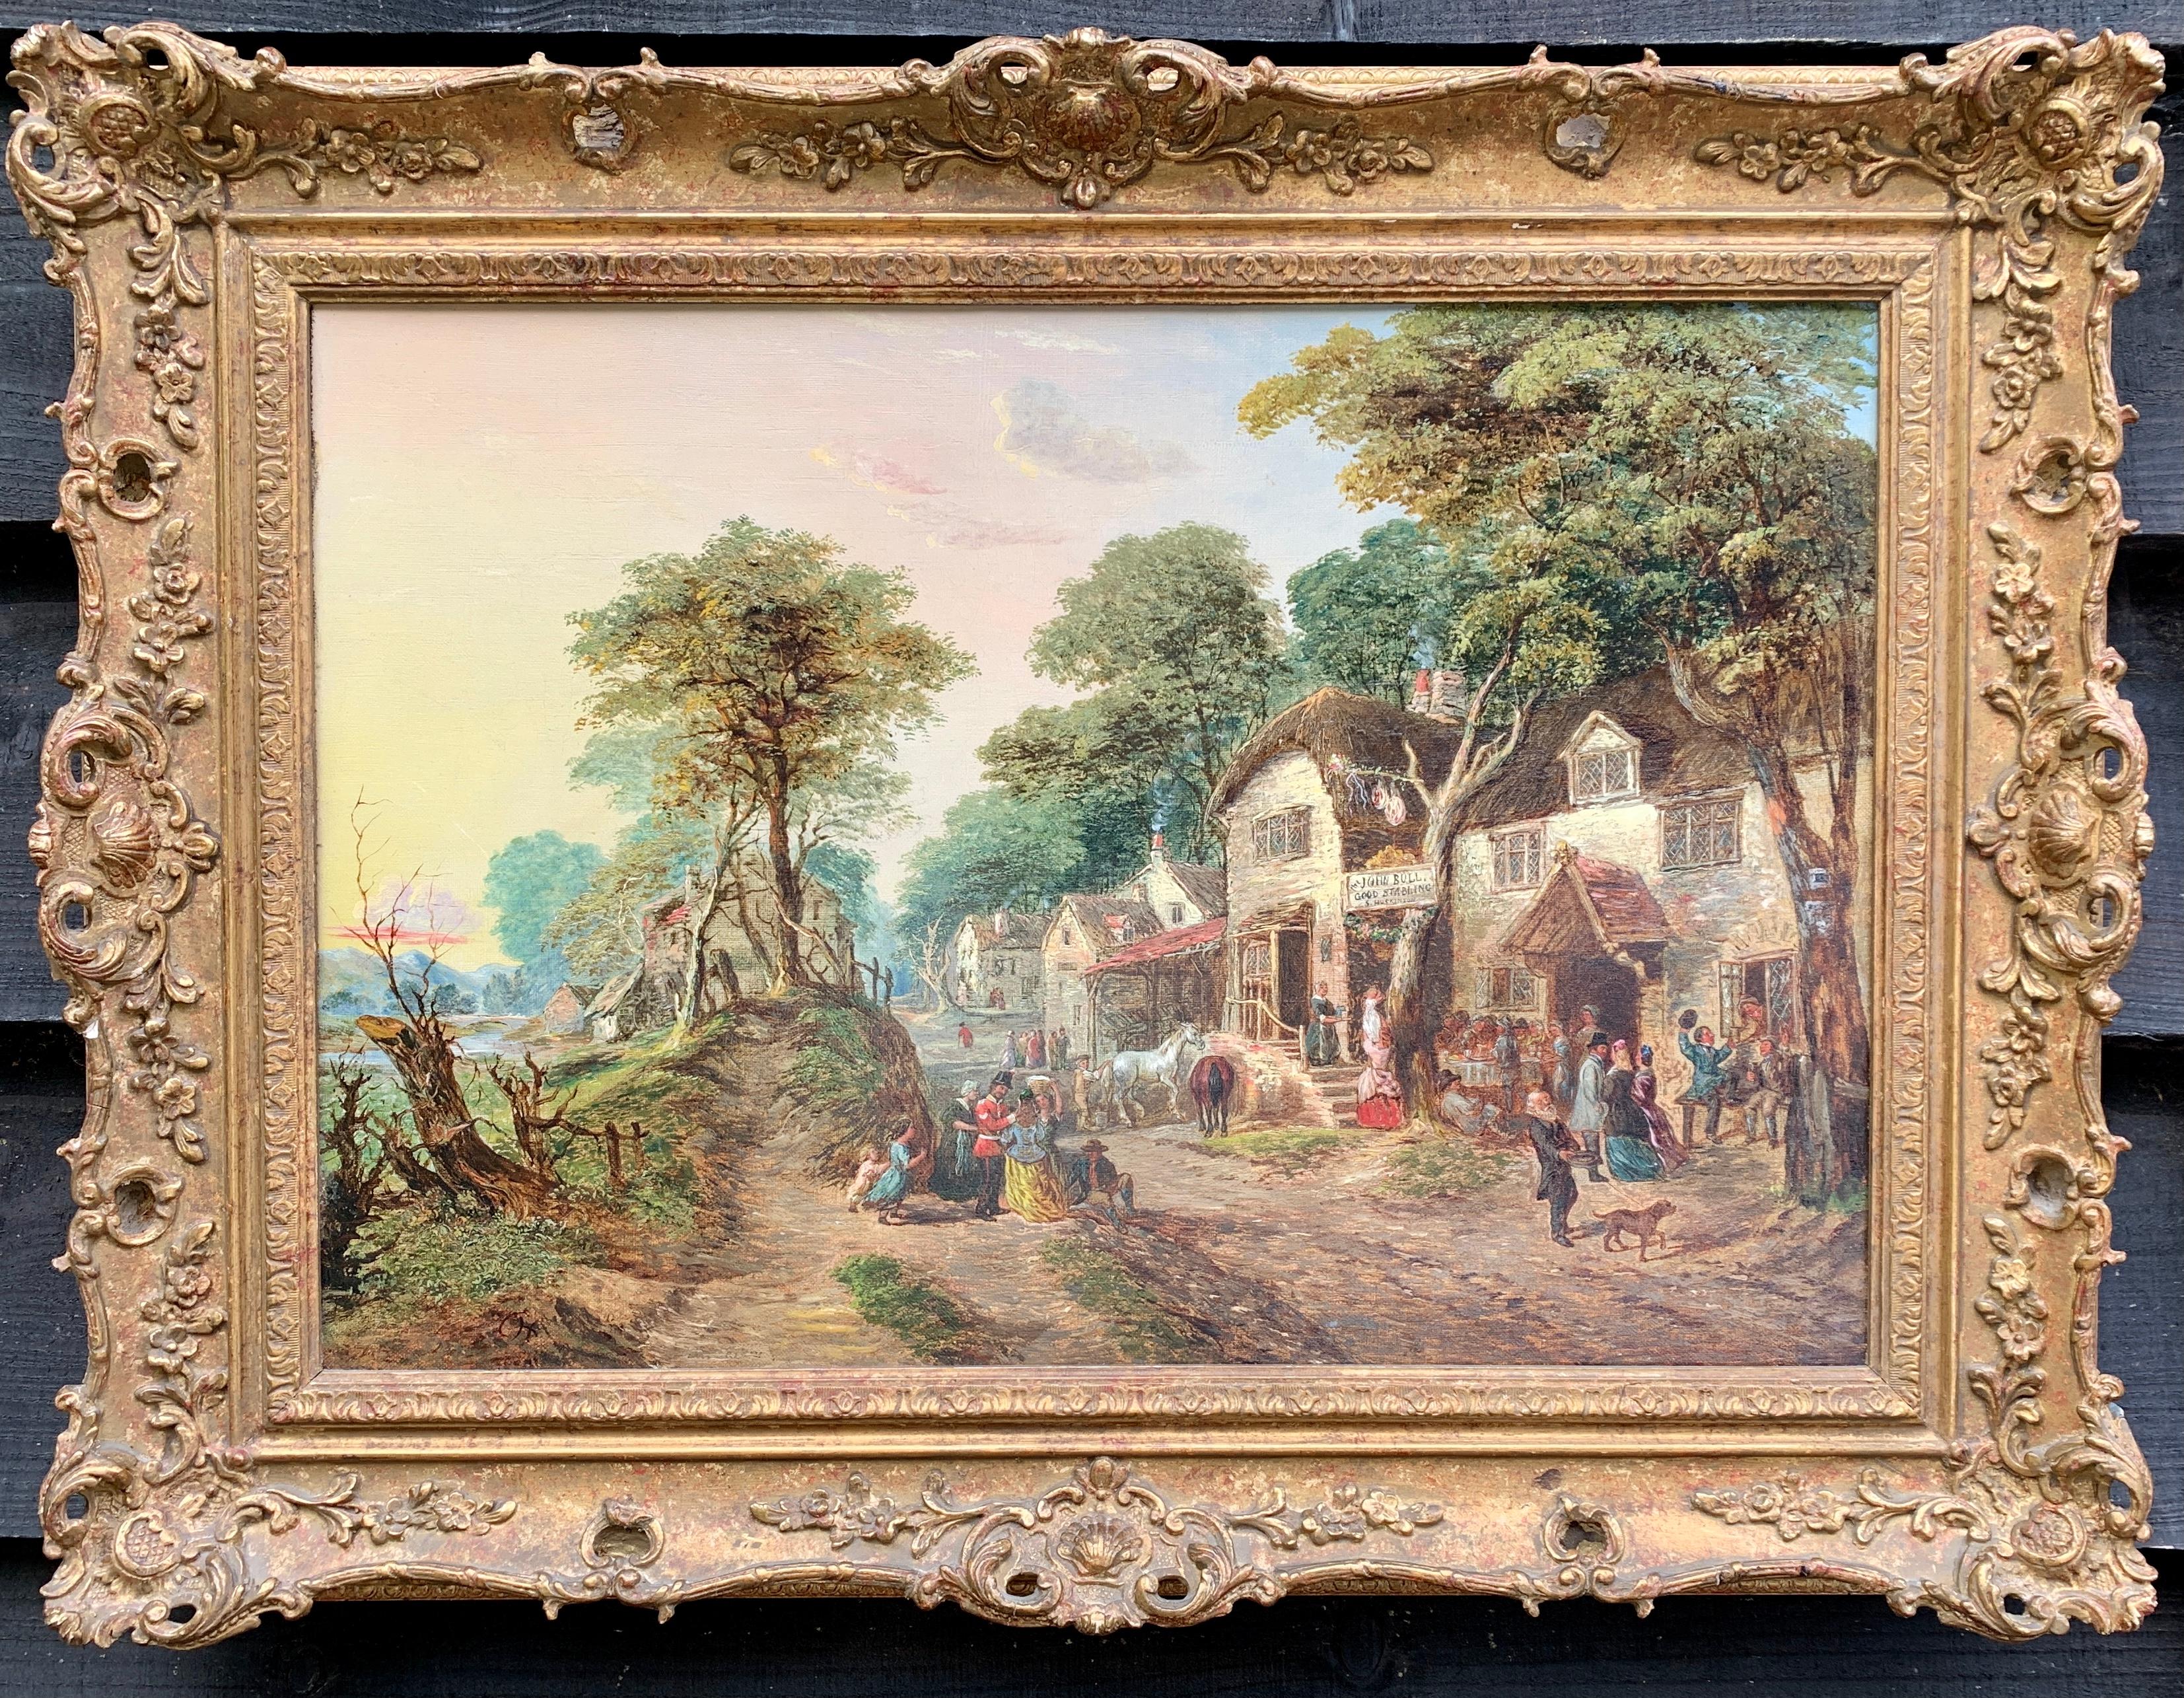  Antique Oil of an English Village landscape, with horses, people, a pub.